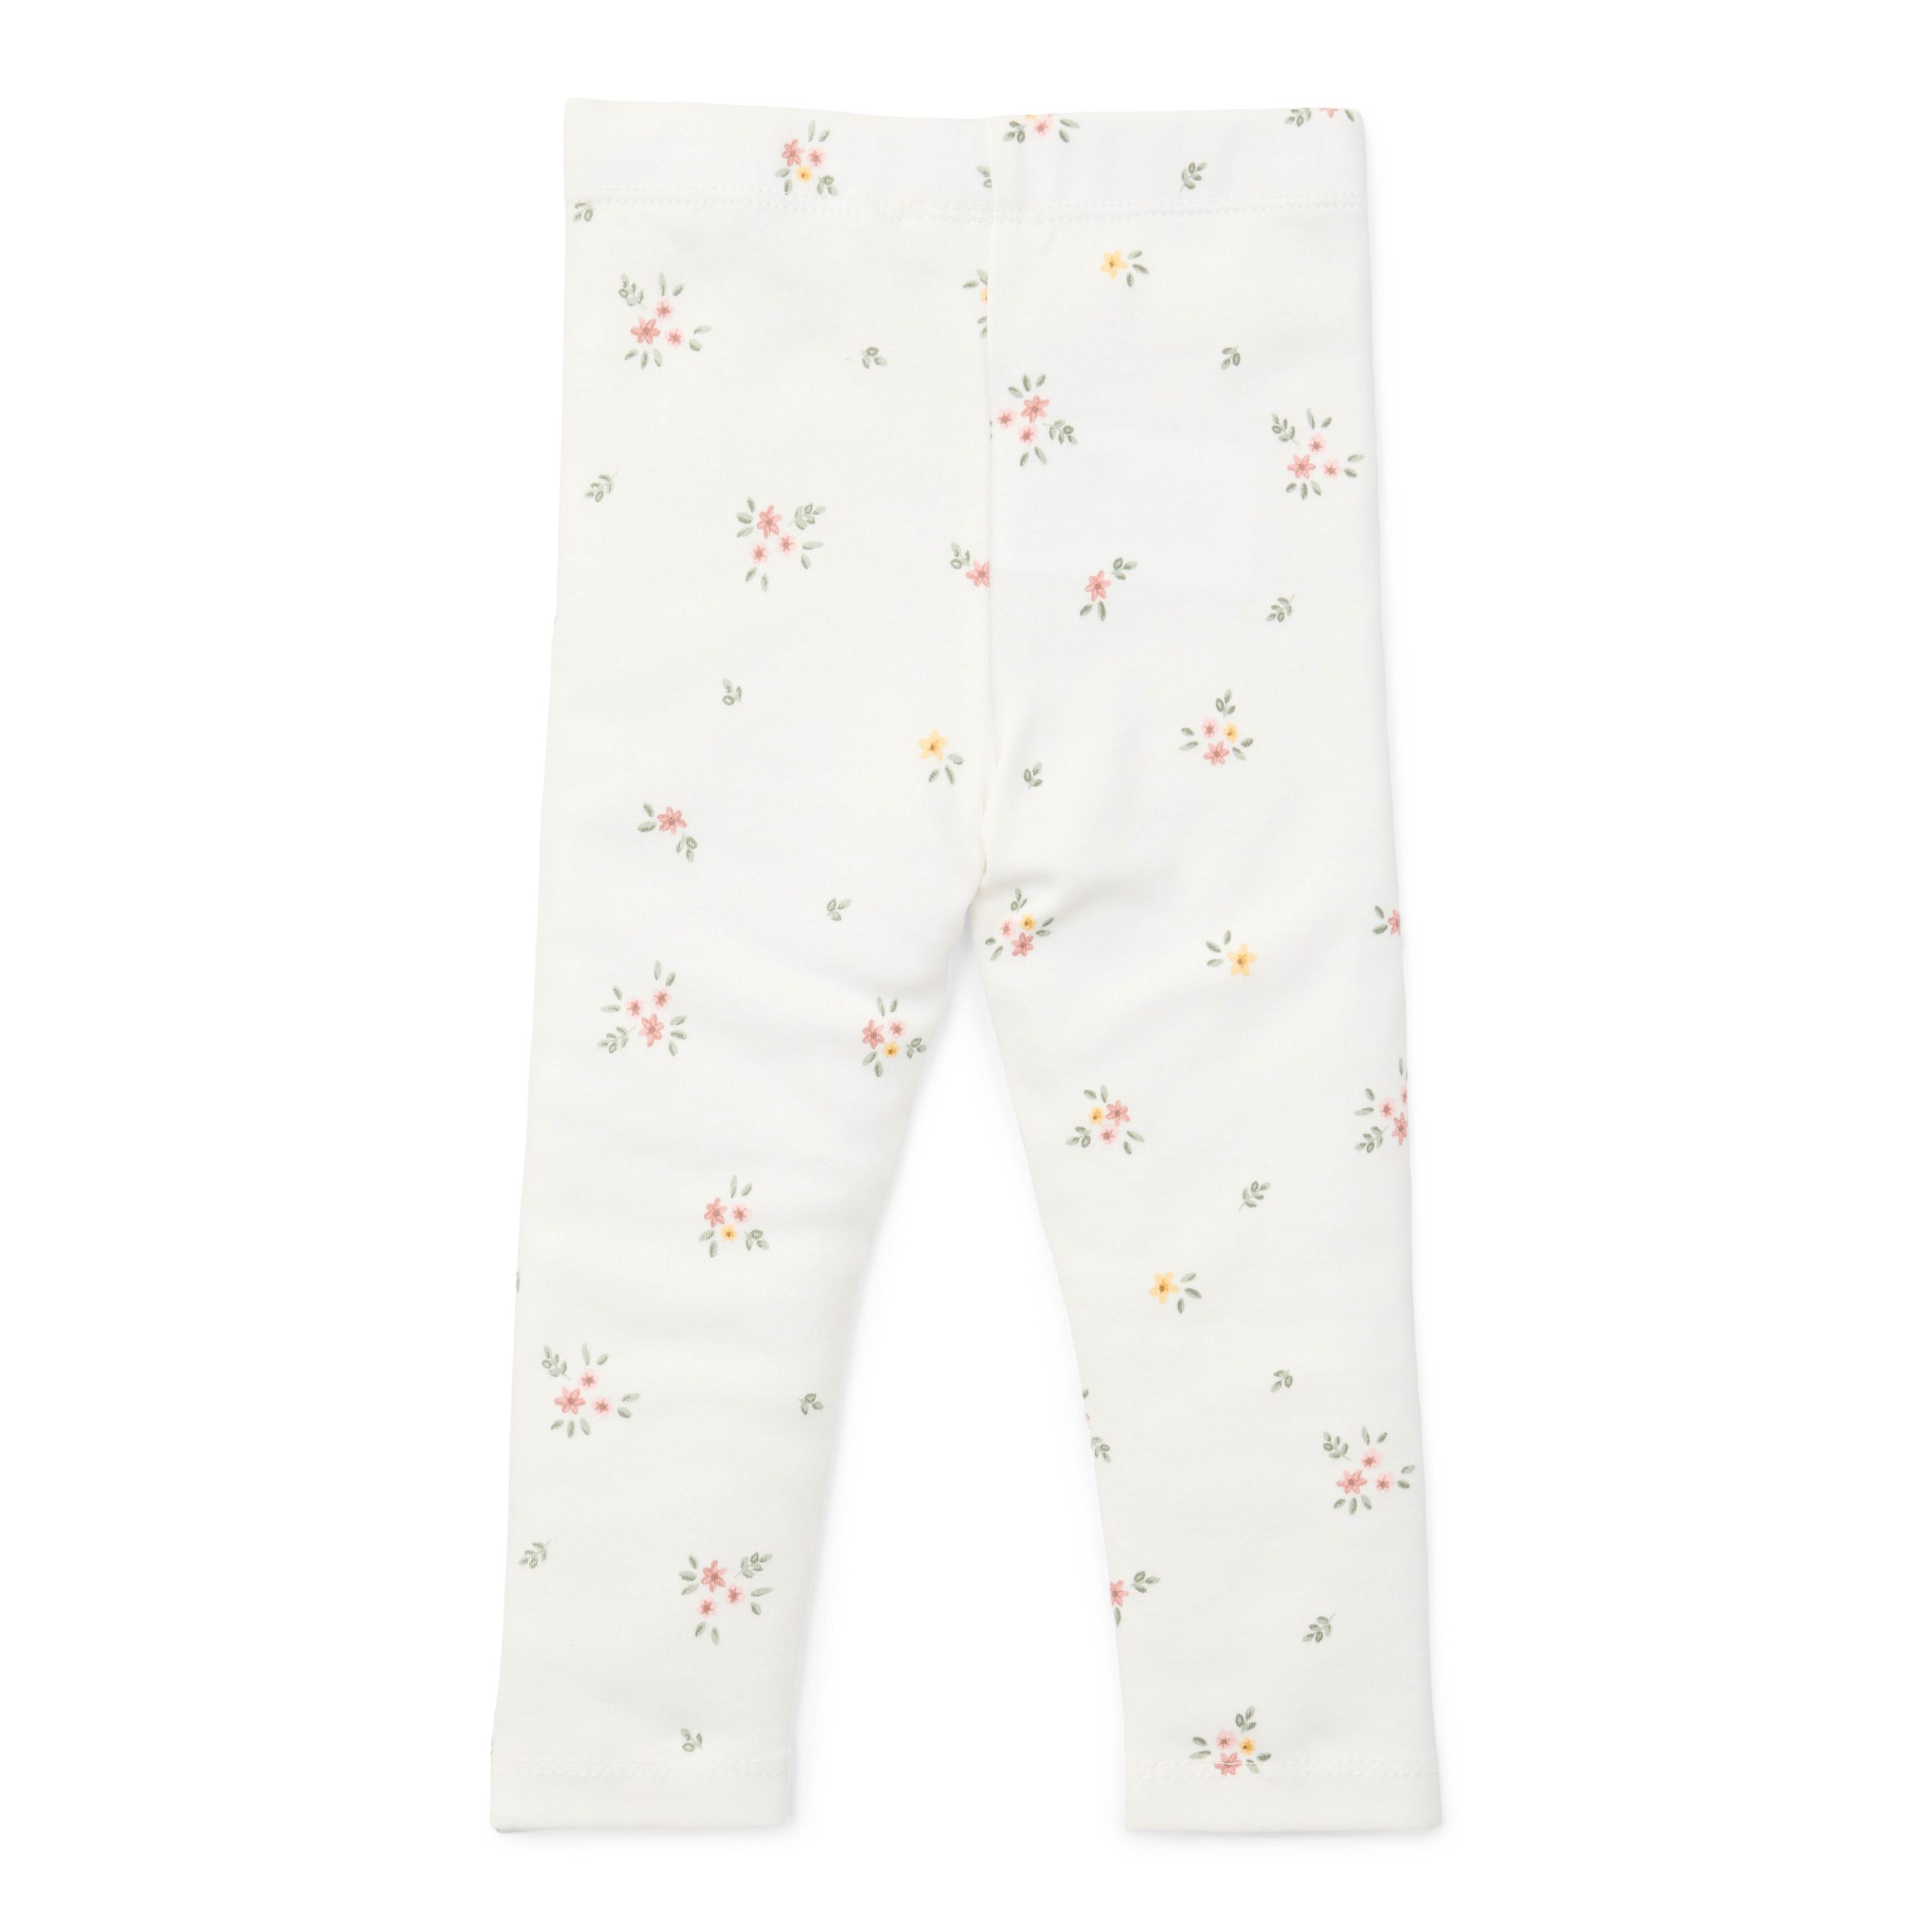 CL24223001 – CL24223002 – CL24223003 – CL24223004 – CL24223005 – CL24223006 -Trousers Baby Bunny – New Born Naturals Bunny (2)